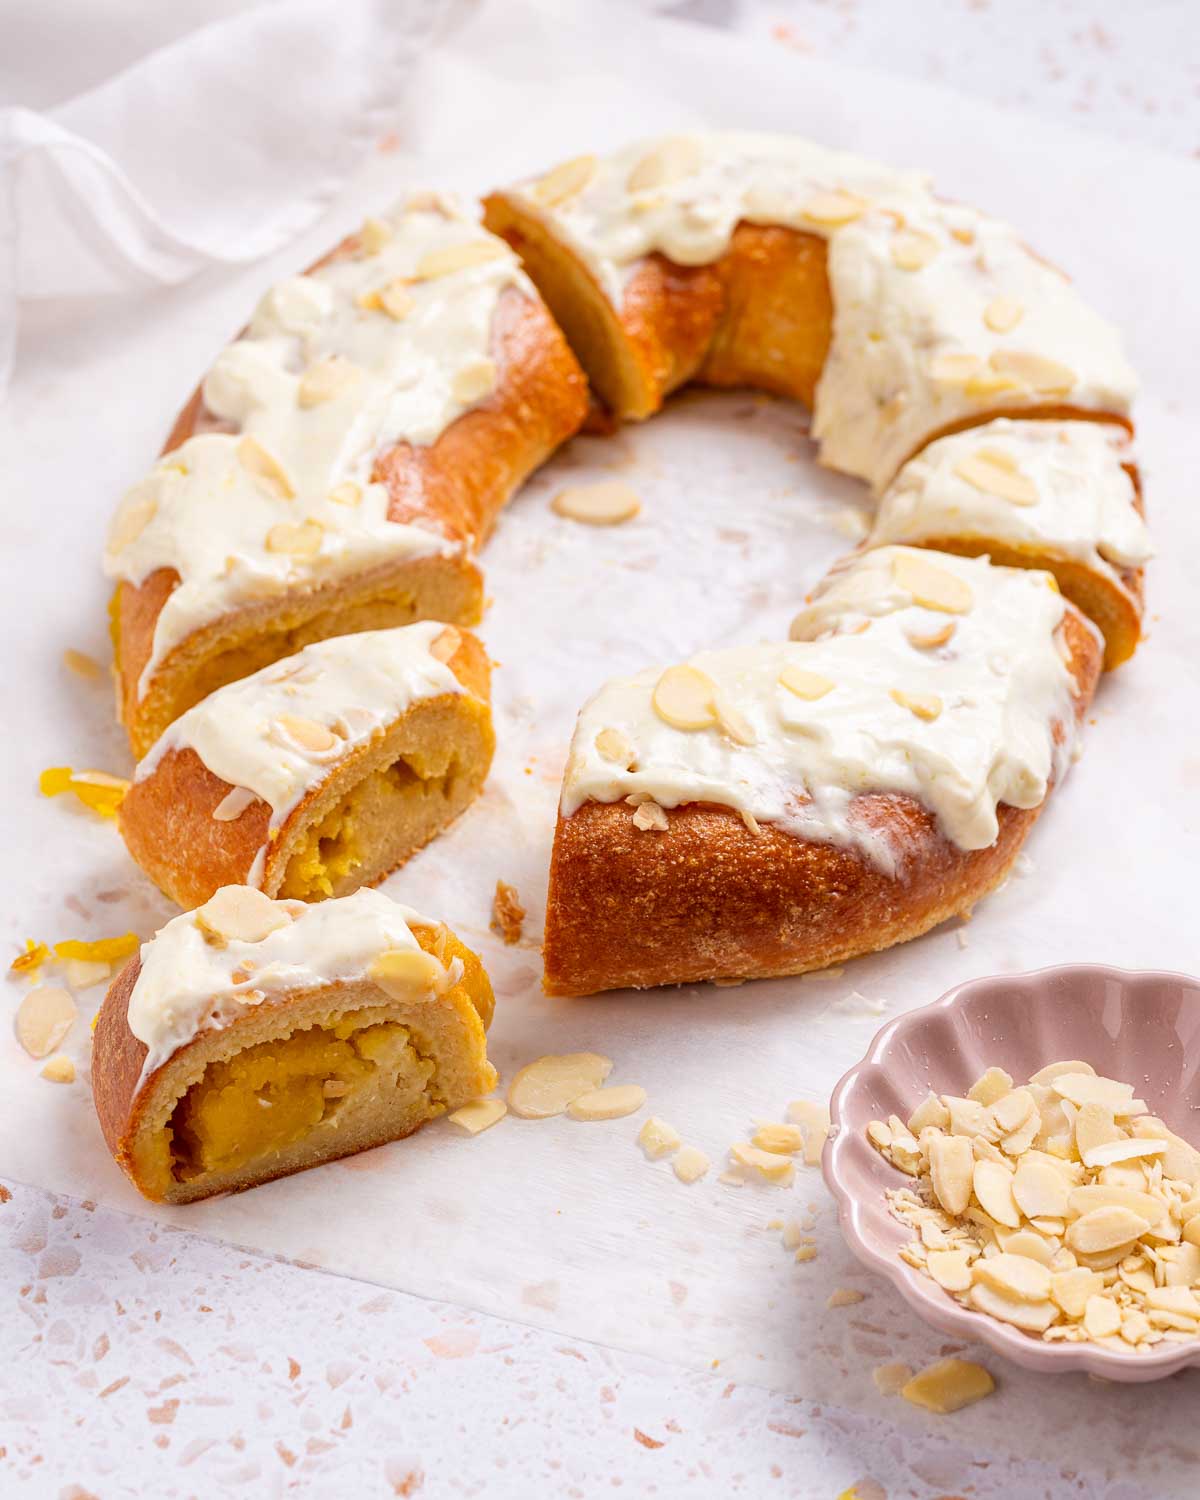 A keto pumpkin Kringle Danish is a  pastry ring with a pumpkin cream filling, and cream cheese frosting with sliced almonds for garnish.